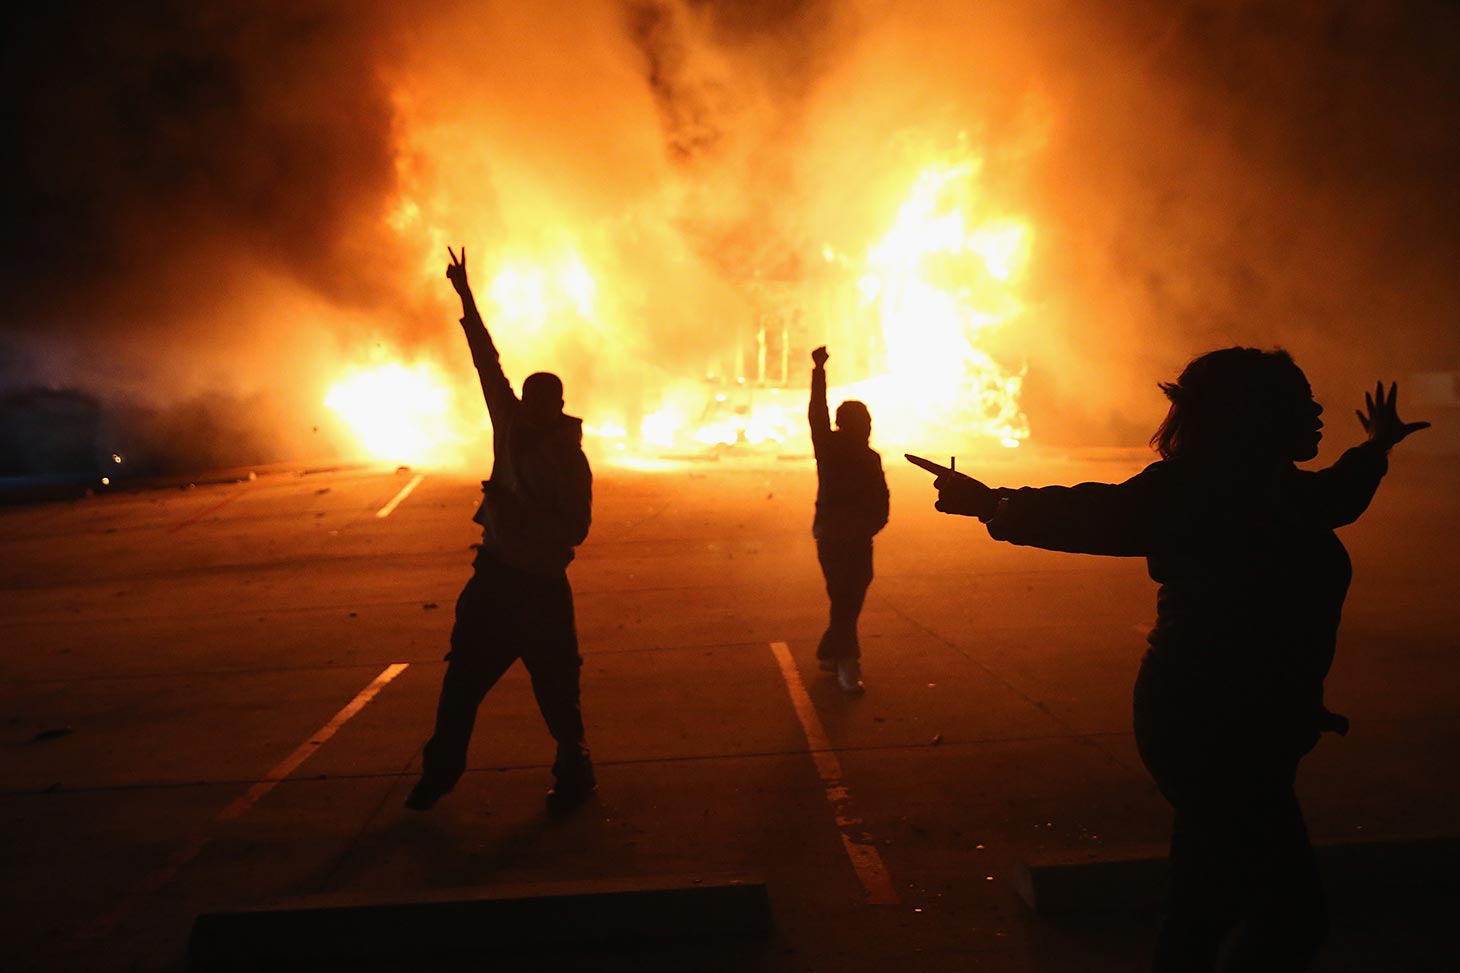 FERGUSON, MO - NOVEMBER 24: Demonstrators celebrate as a business burns after it was set on fire during rioting following the grand jury announcement in the Michael Brown case on November 24, 2014 in Ferguson, Missouri. Ferguson has been struggling to return to normal after Brown, an 18-year-old black man, was killed by Darren Wilson, a white Ferguson police officer, on August 9. His death has sparked months of sometimes violent protests in Ferguson. A grand jury today declined to indict officer Wilson. (Photo by Scott Olson/Getty Images)